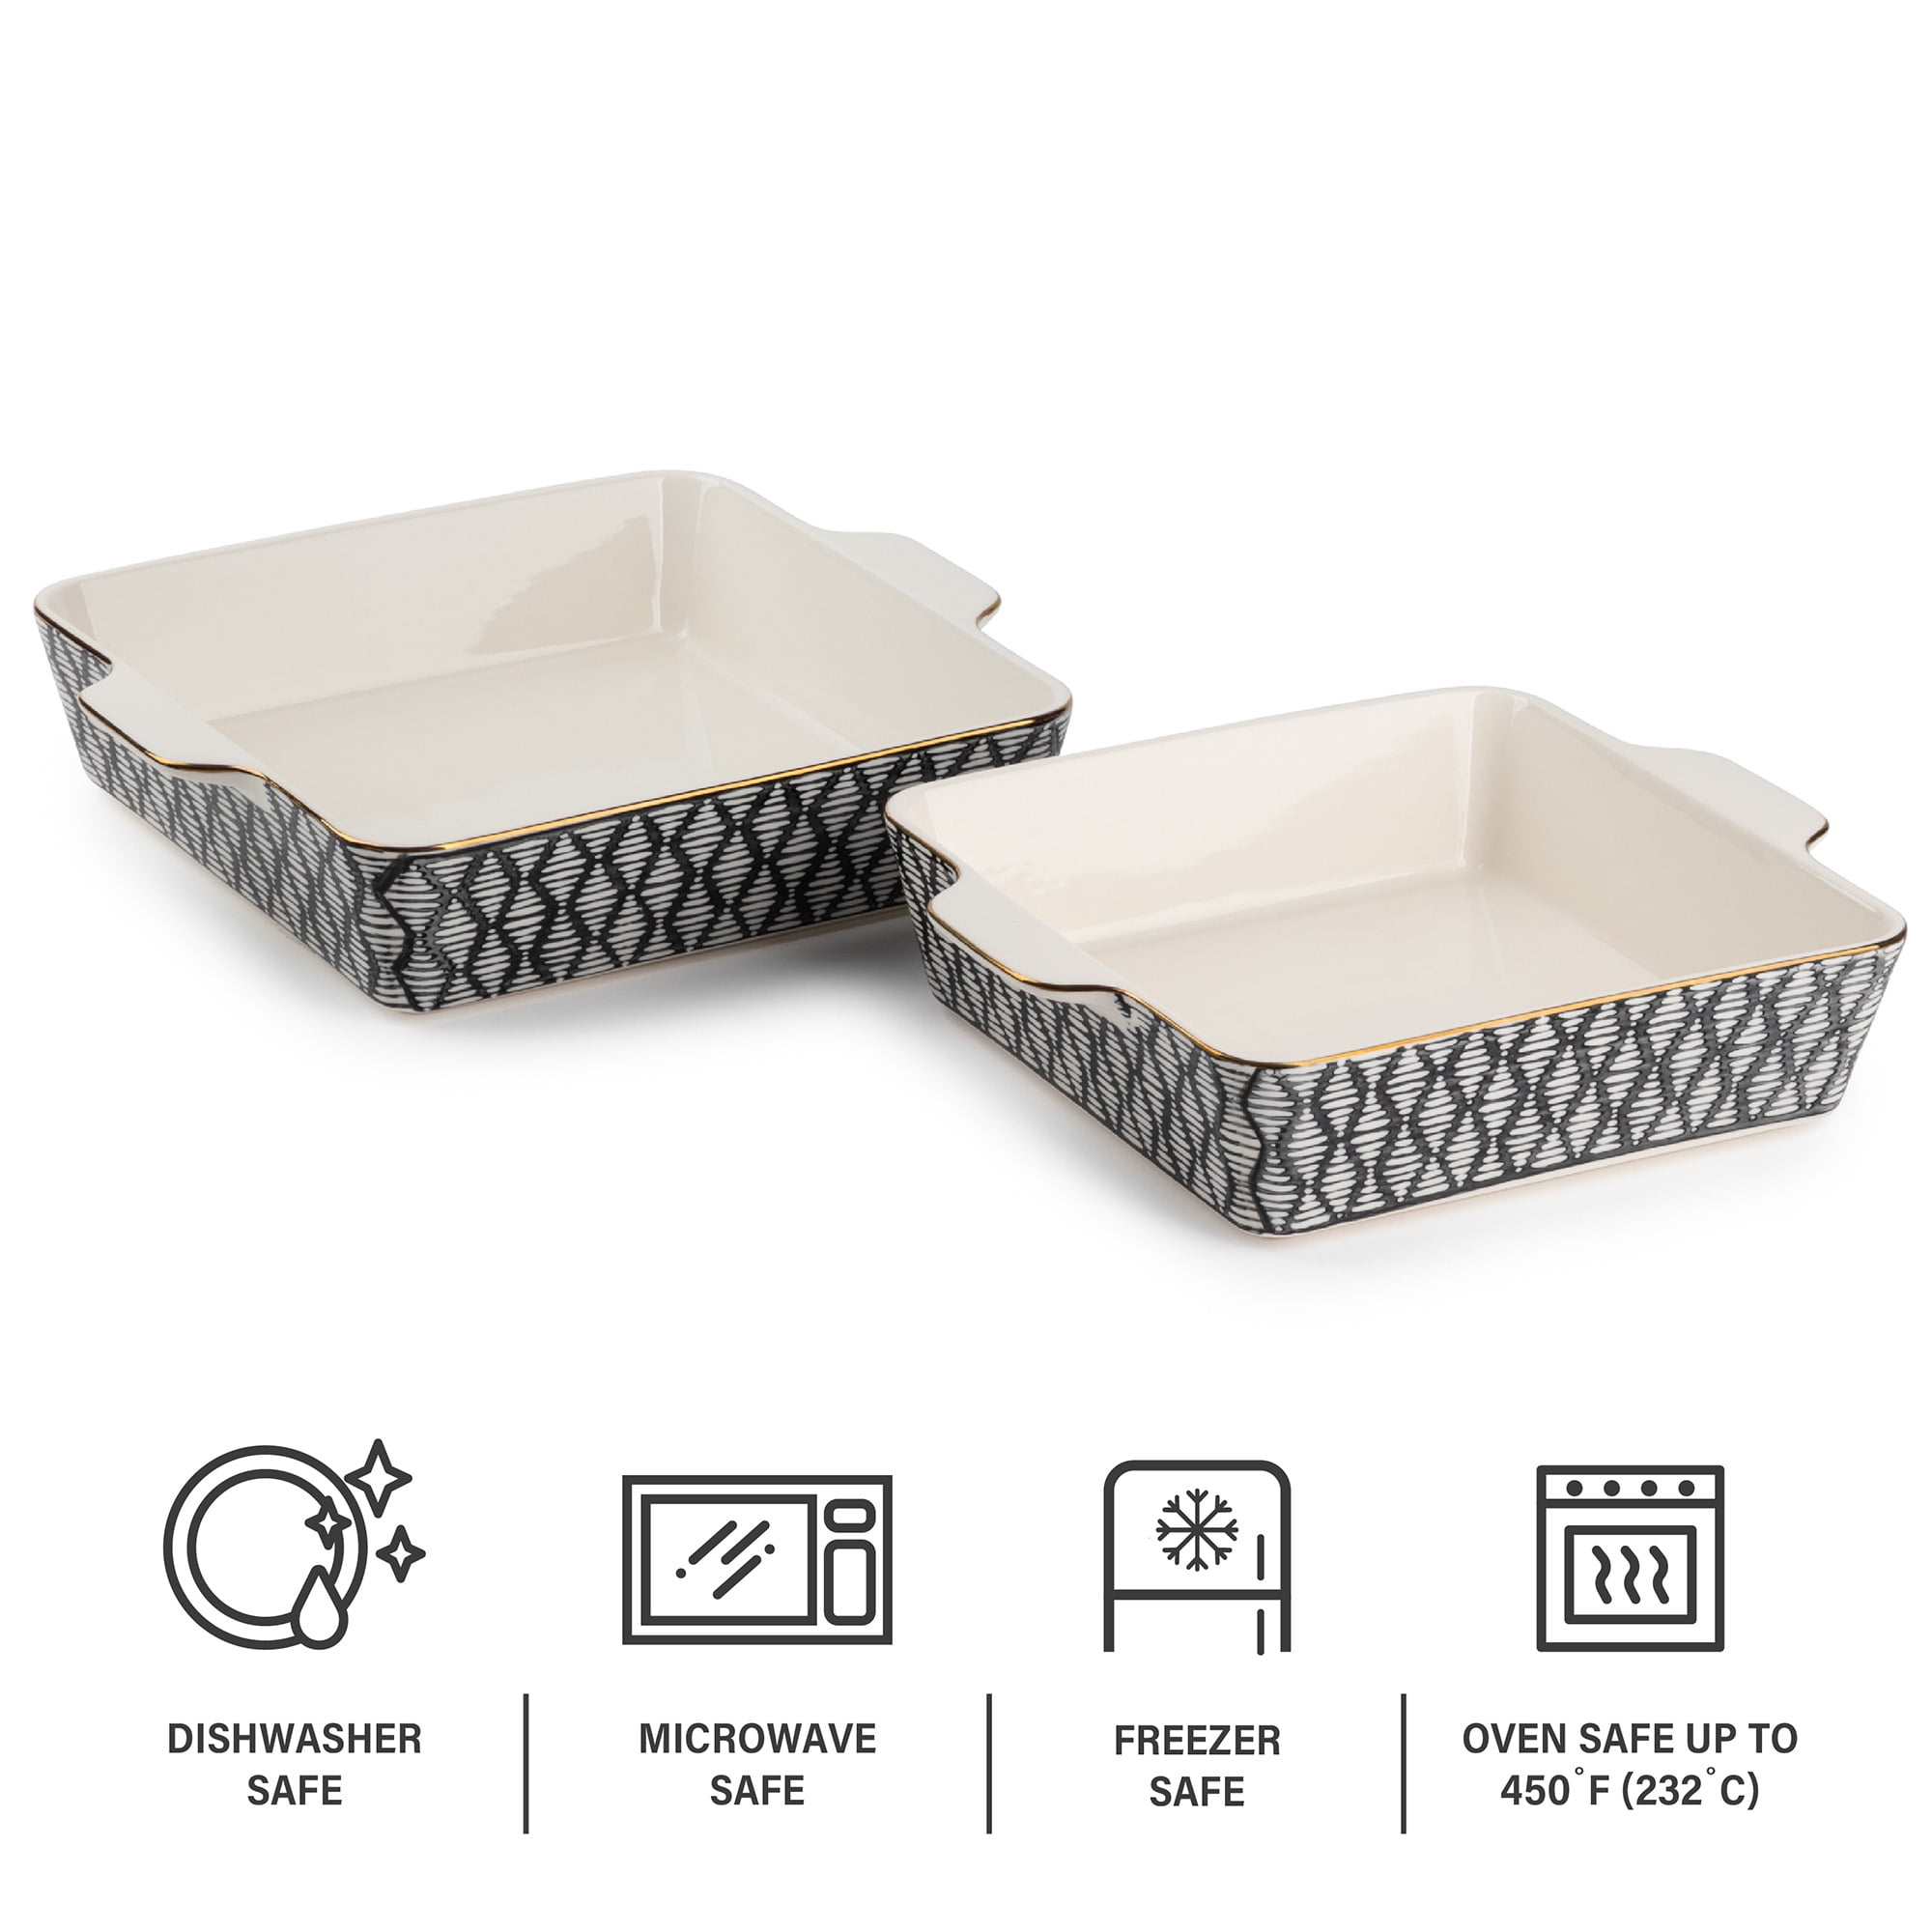 Flair 1.6-liter Casserole Dish with Lid